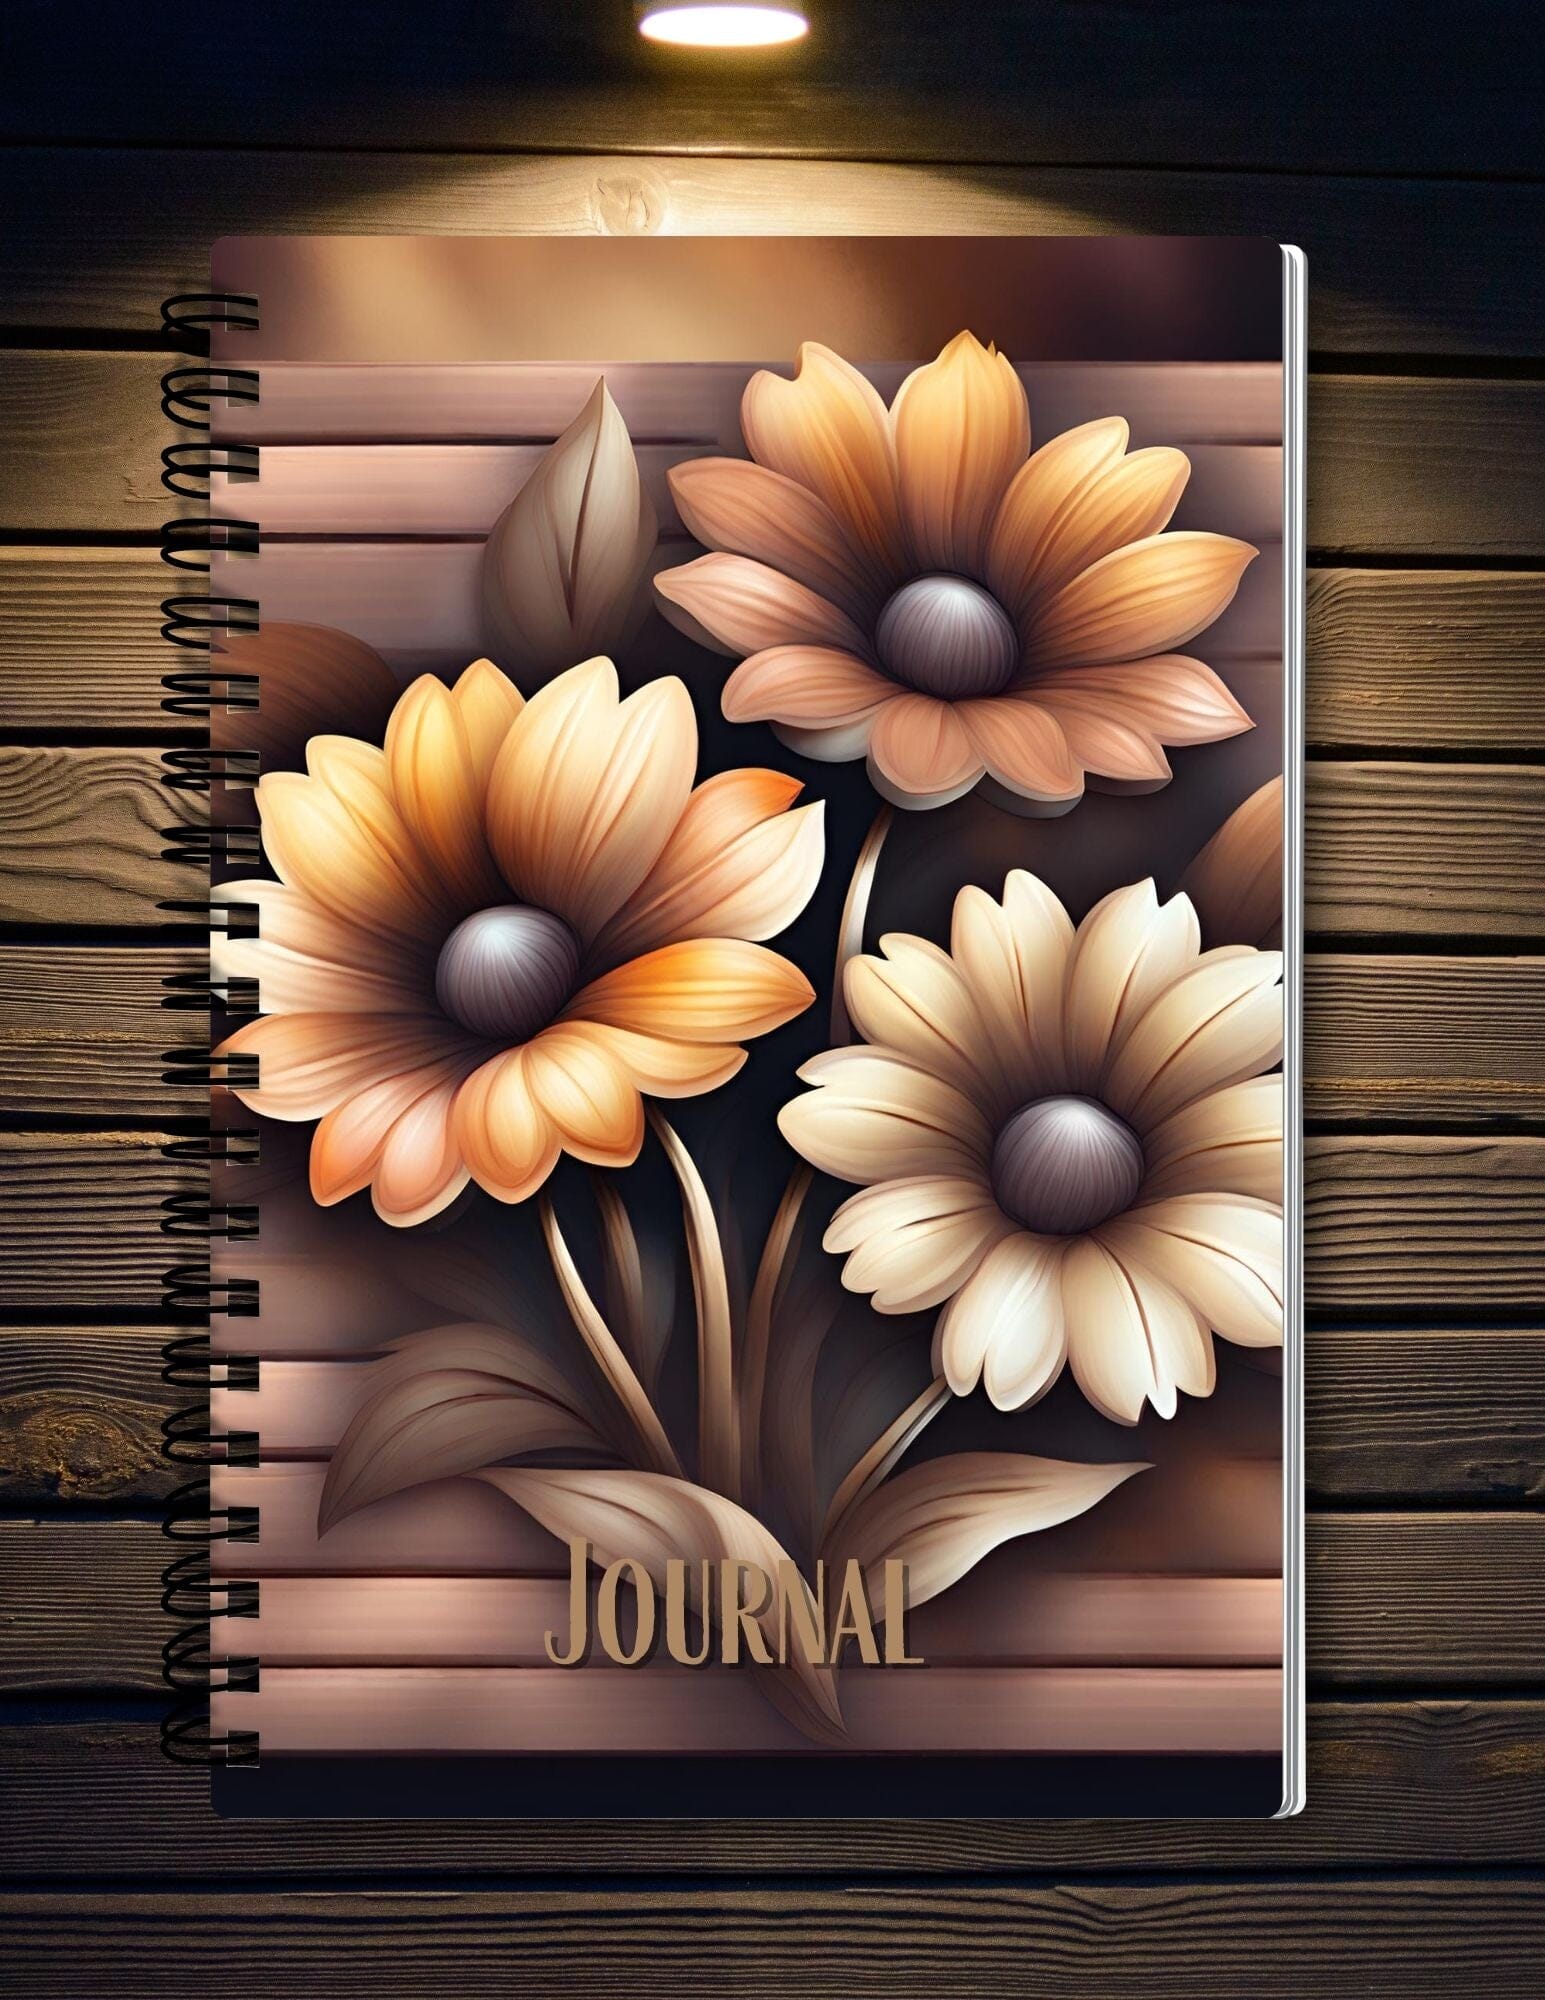 Blossom & Thrive Sistah Journal Earthy Inspirations 